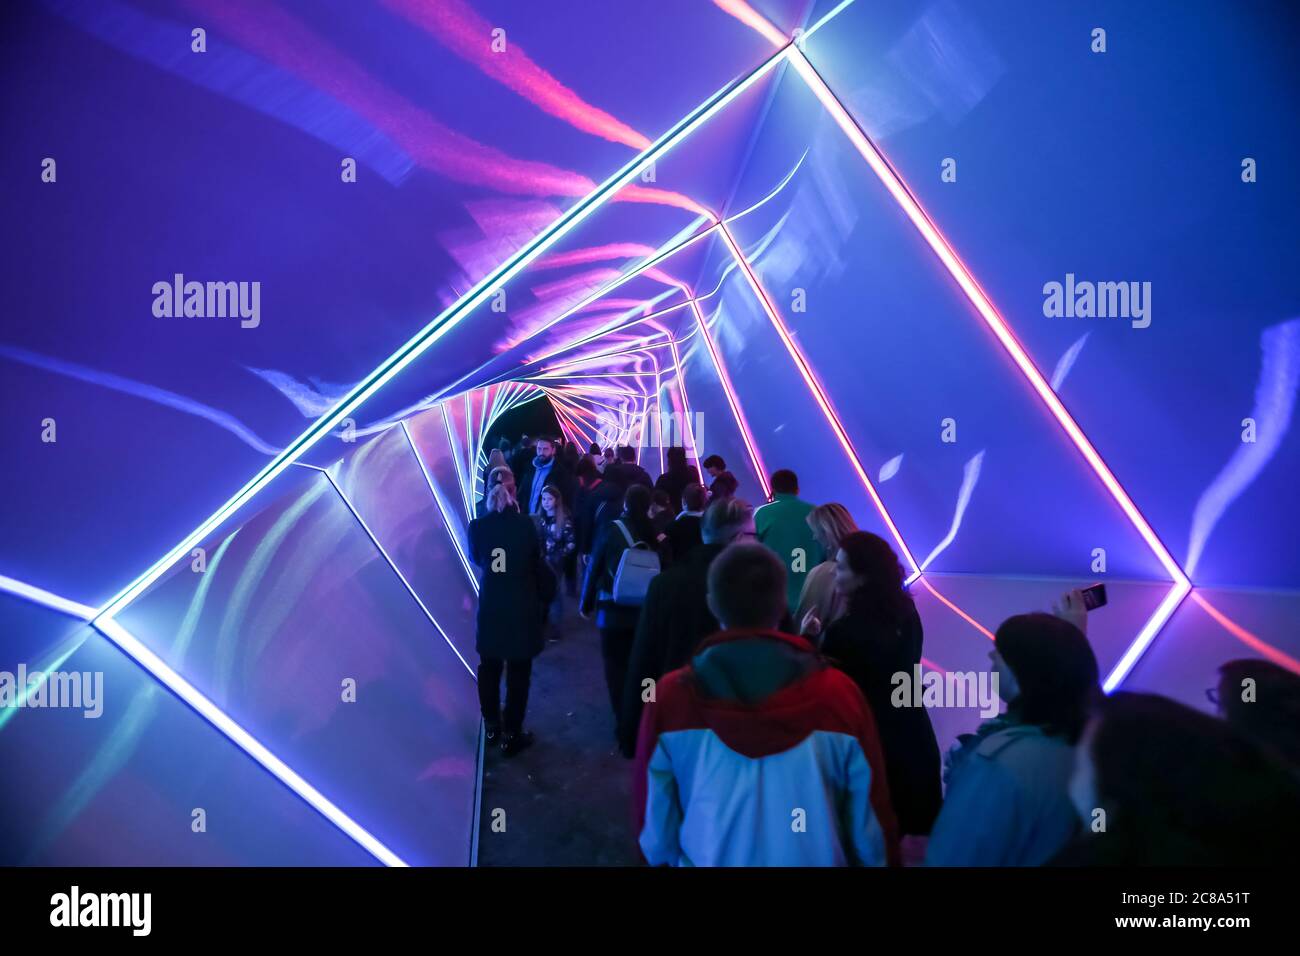 Zagreb, Croatia - 19 March, 2017 : Festival of lights in Zagreb, Croatia. People walking through a lighted tunnel installation with colorful neon ligh Stock Photo